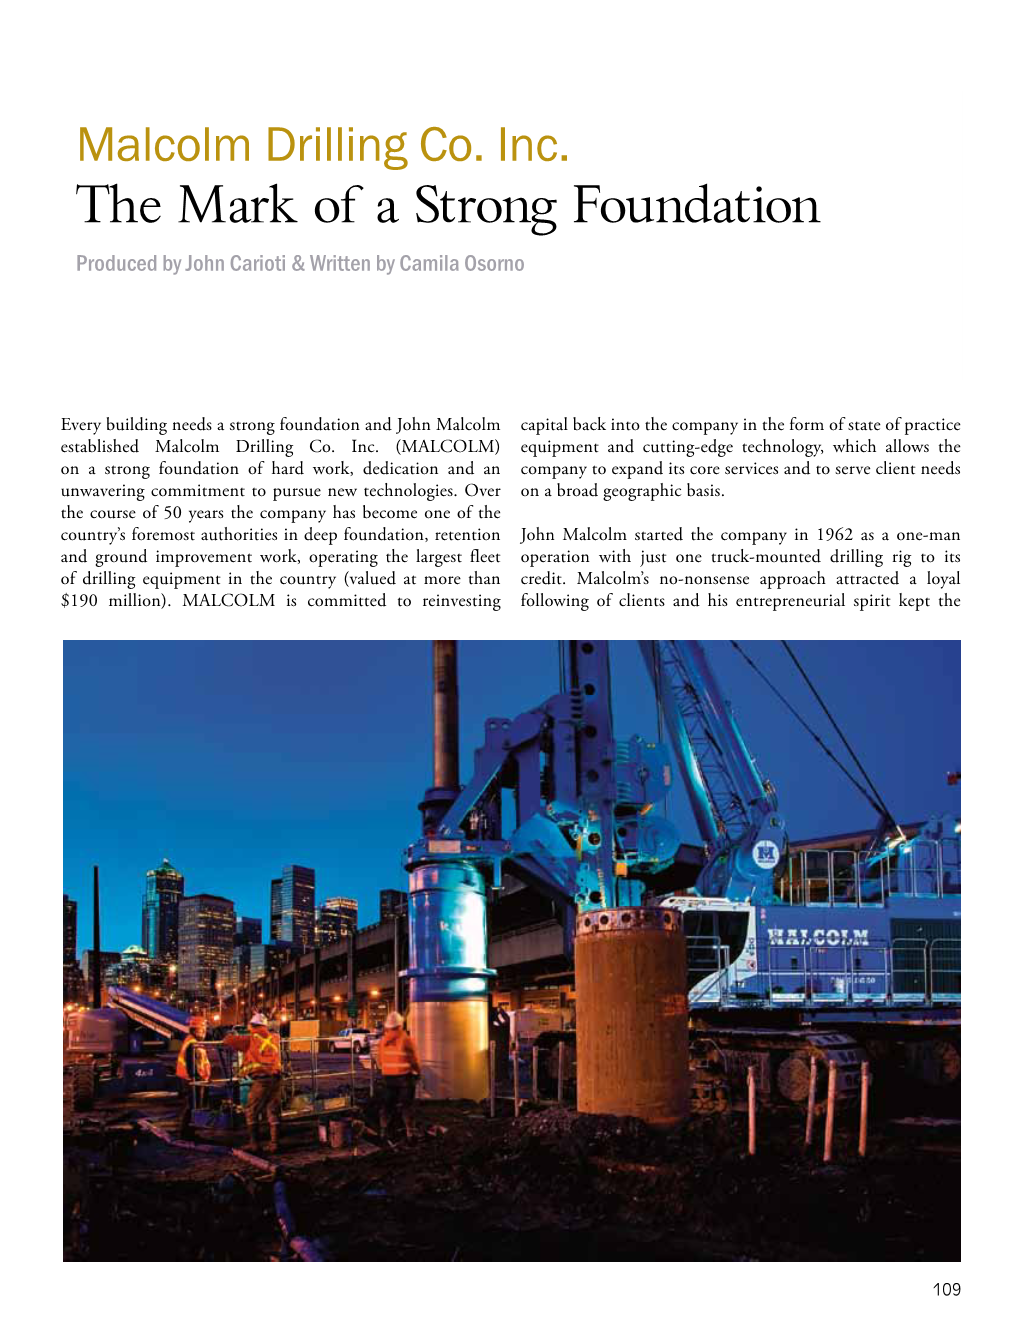 The Mark of a Strong Foundation Produced by John Carioti & Written by Camila Osorno